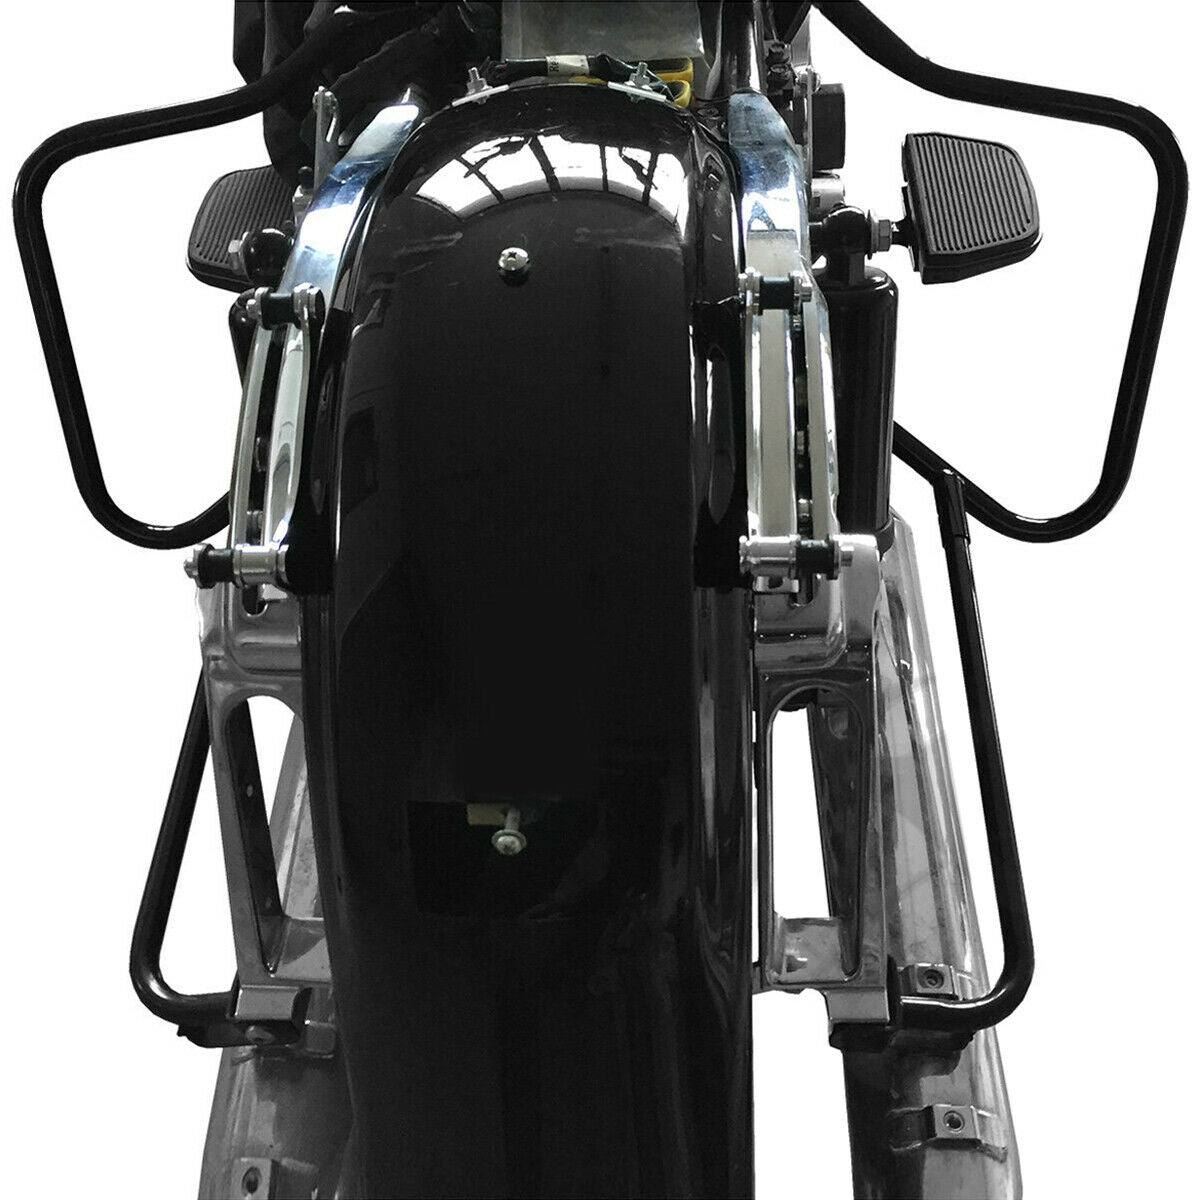 Saddlebags Bracket Guard Bars Fit For Harley Road King Electra Road Glide 14-22 - Moto Life Products